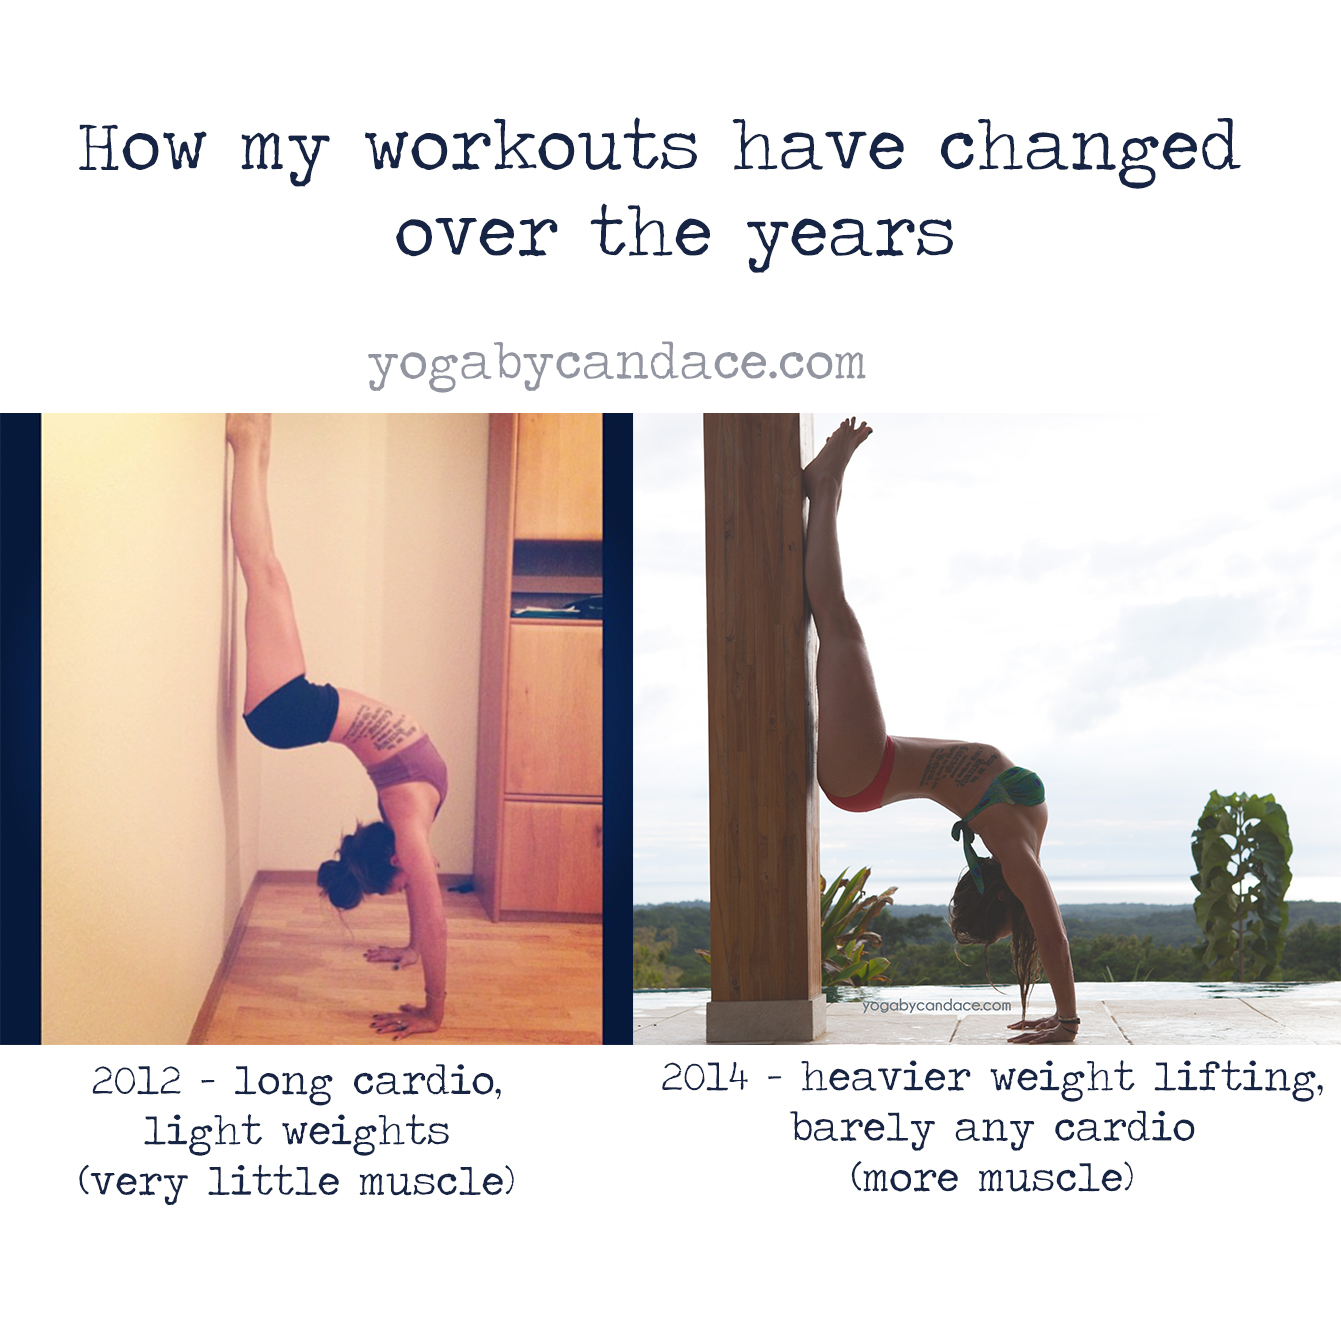 Workout Wednesday: How my workouts have changed over the years